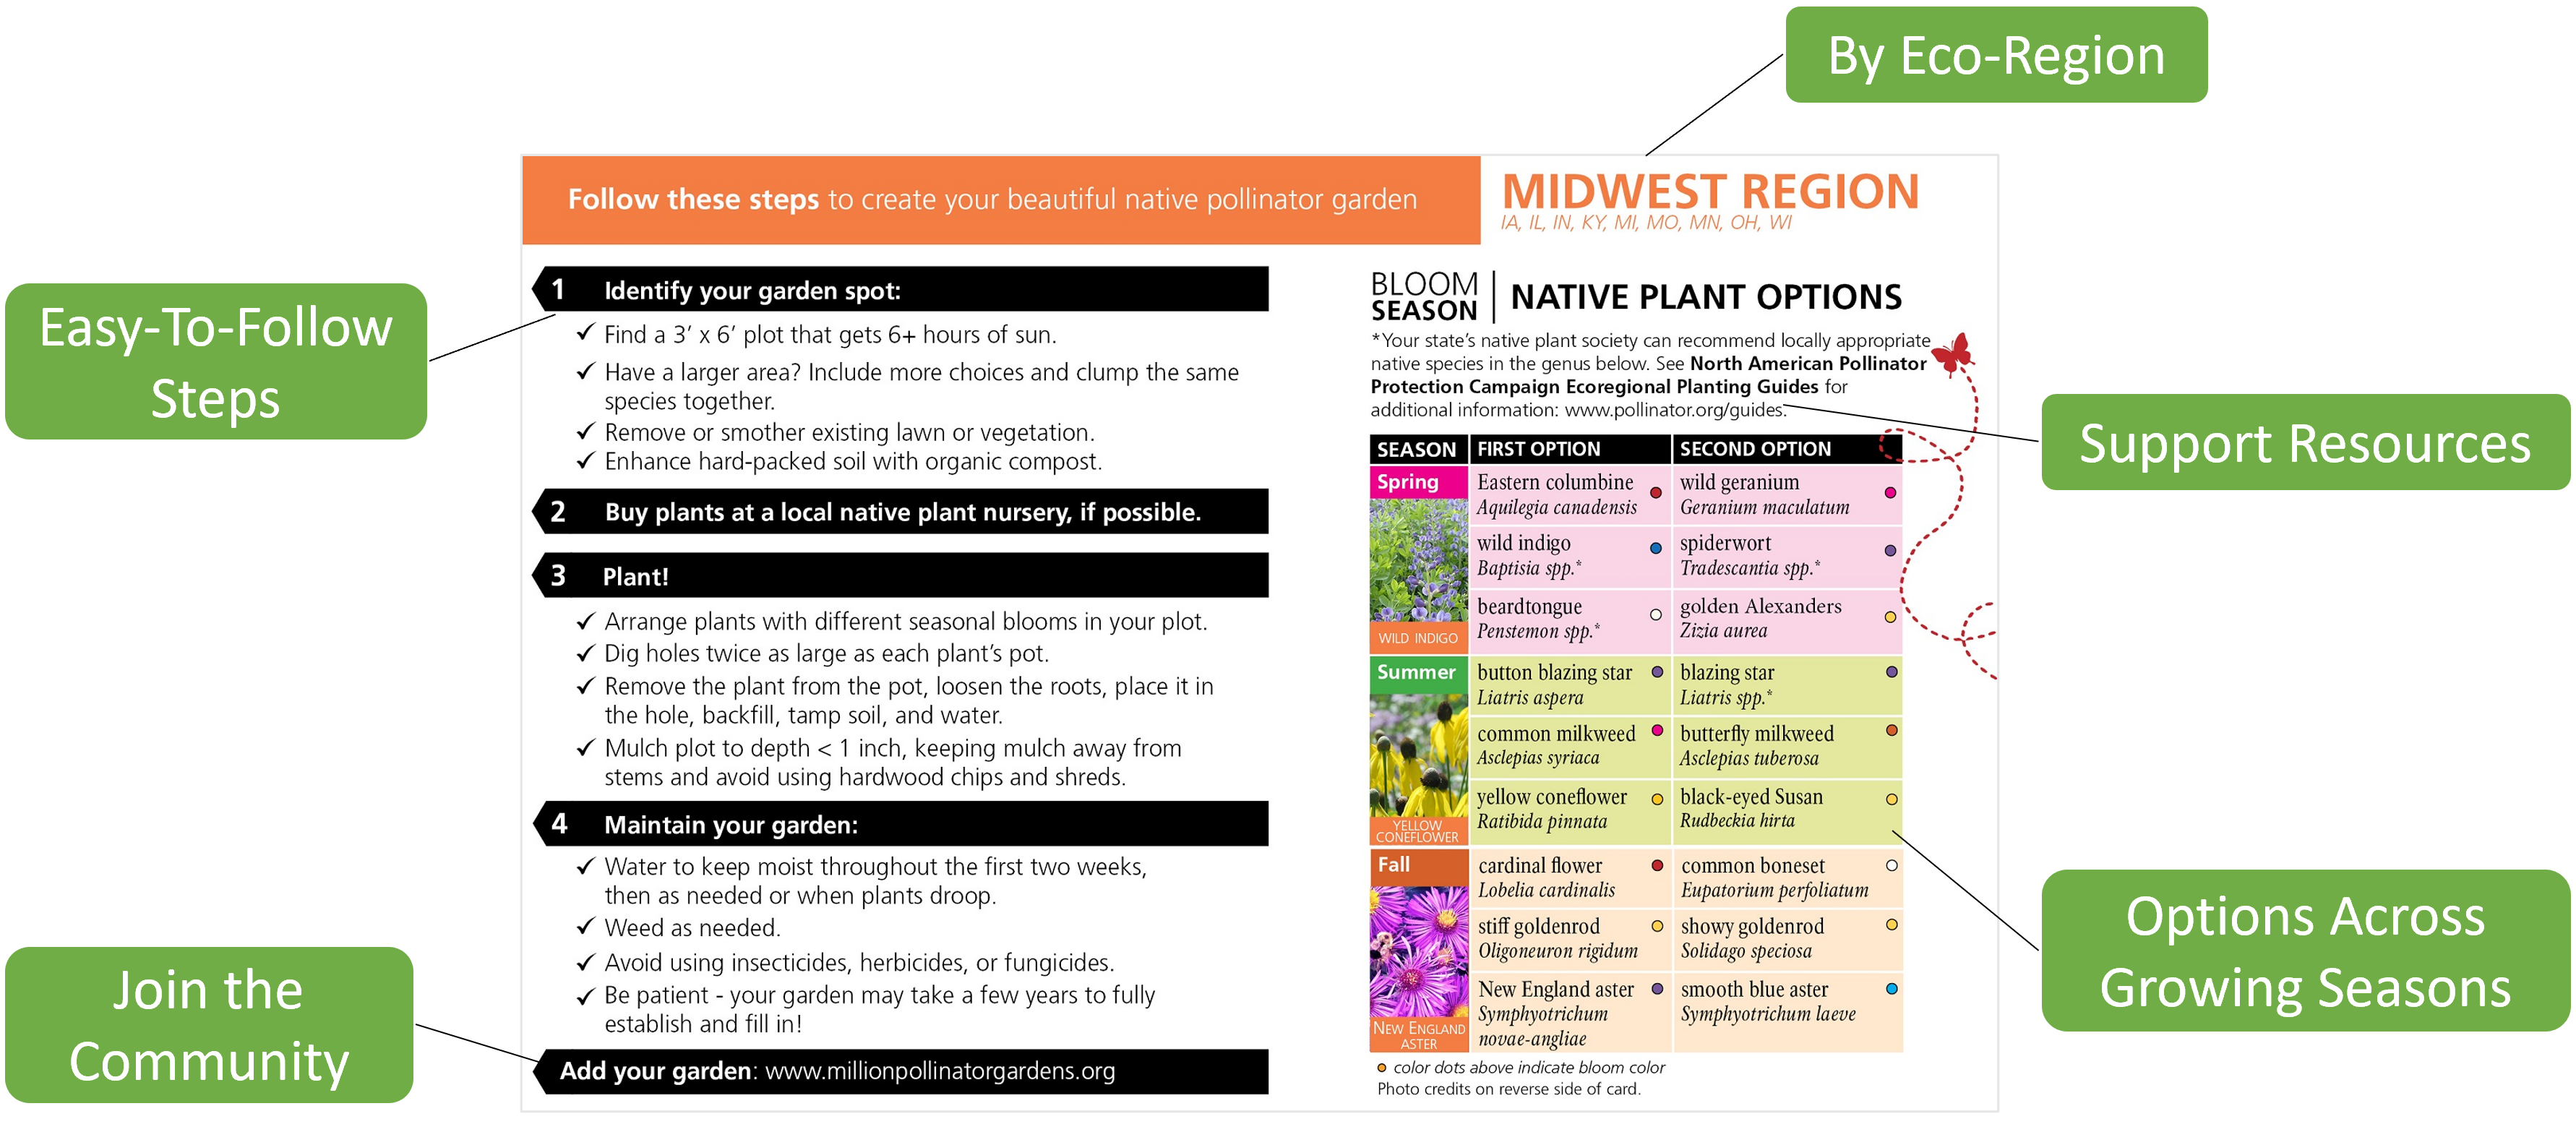 Pollinator garden card of the midwest region with the following called out: "by eco-region, support resources, options across growing seasons, easy-to-follow steps, join the community"